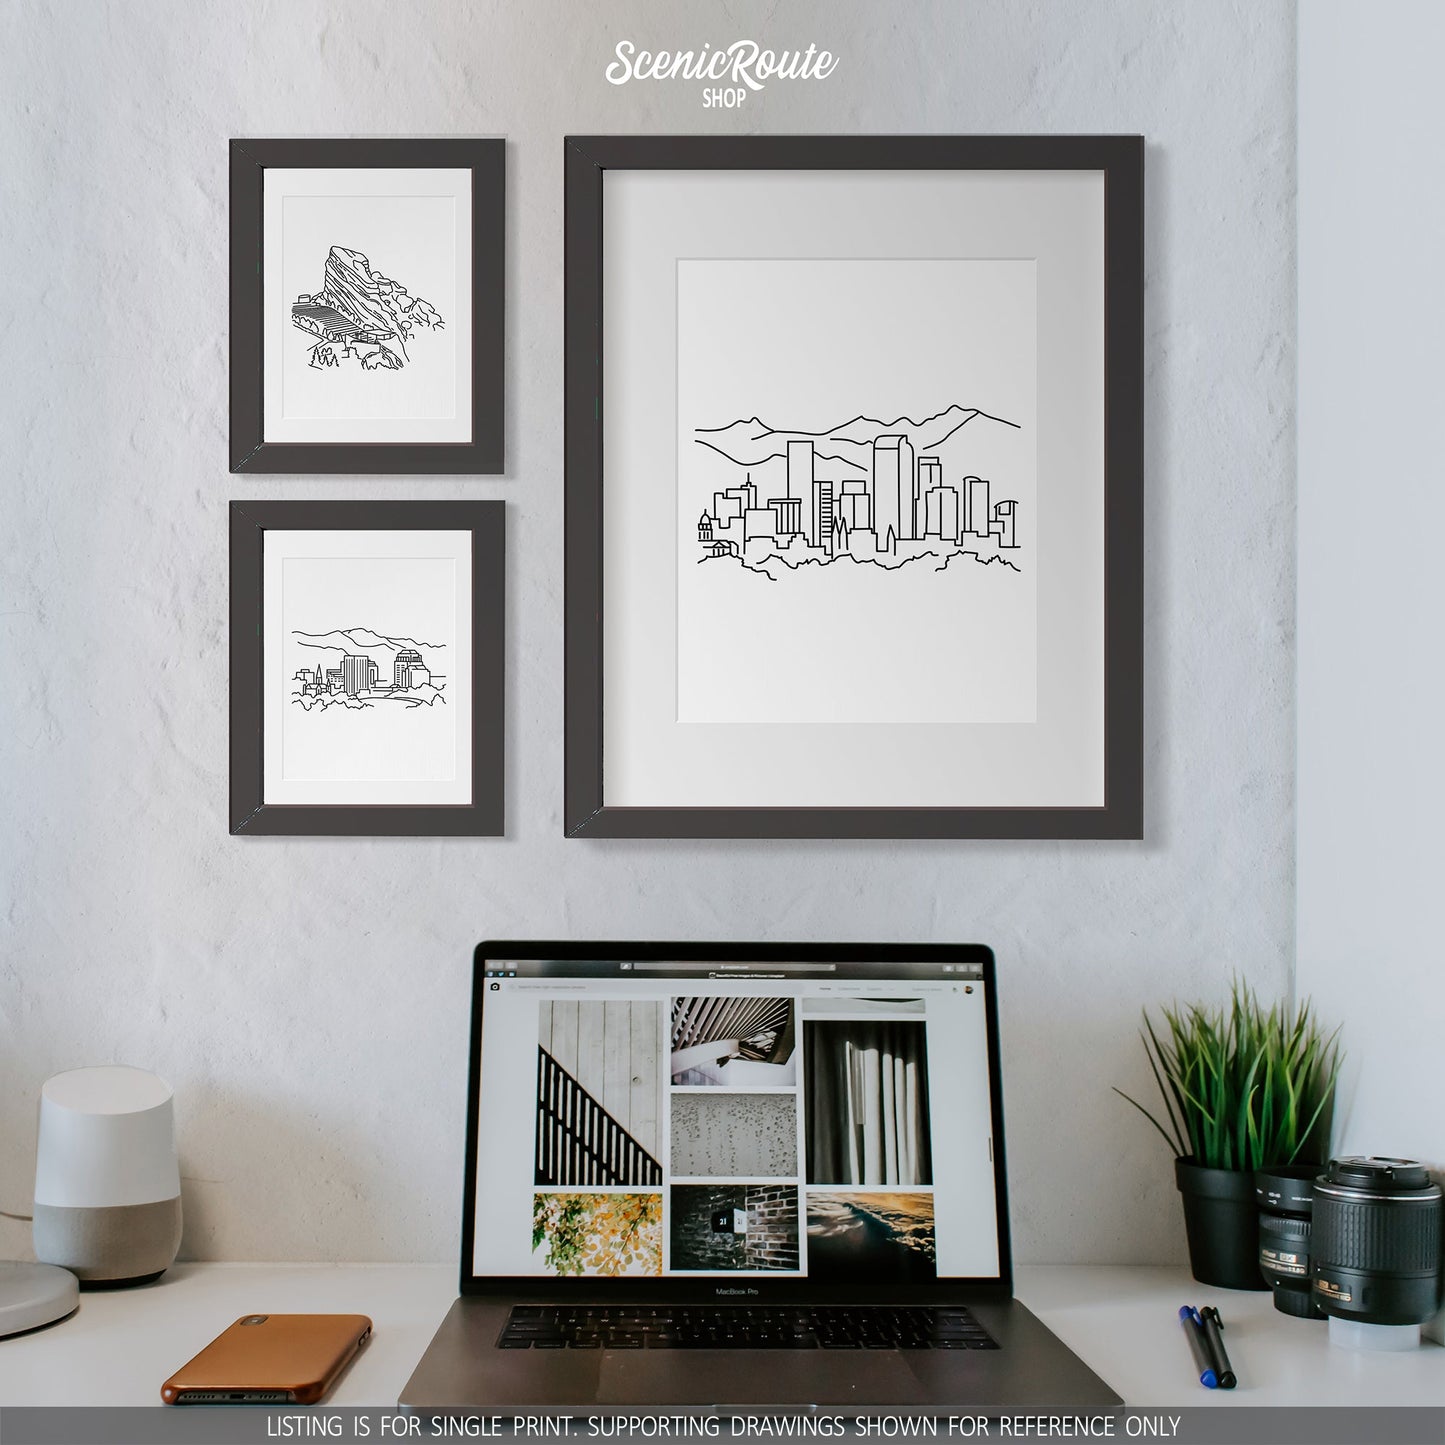 A group of three framed drawings on a wall above a desk with a laptop. The line art drawings include Red Rocks Amphitheatre, and Colorado Springs Skyline